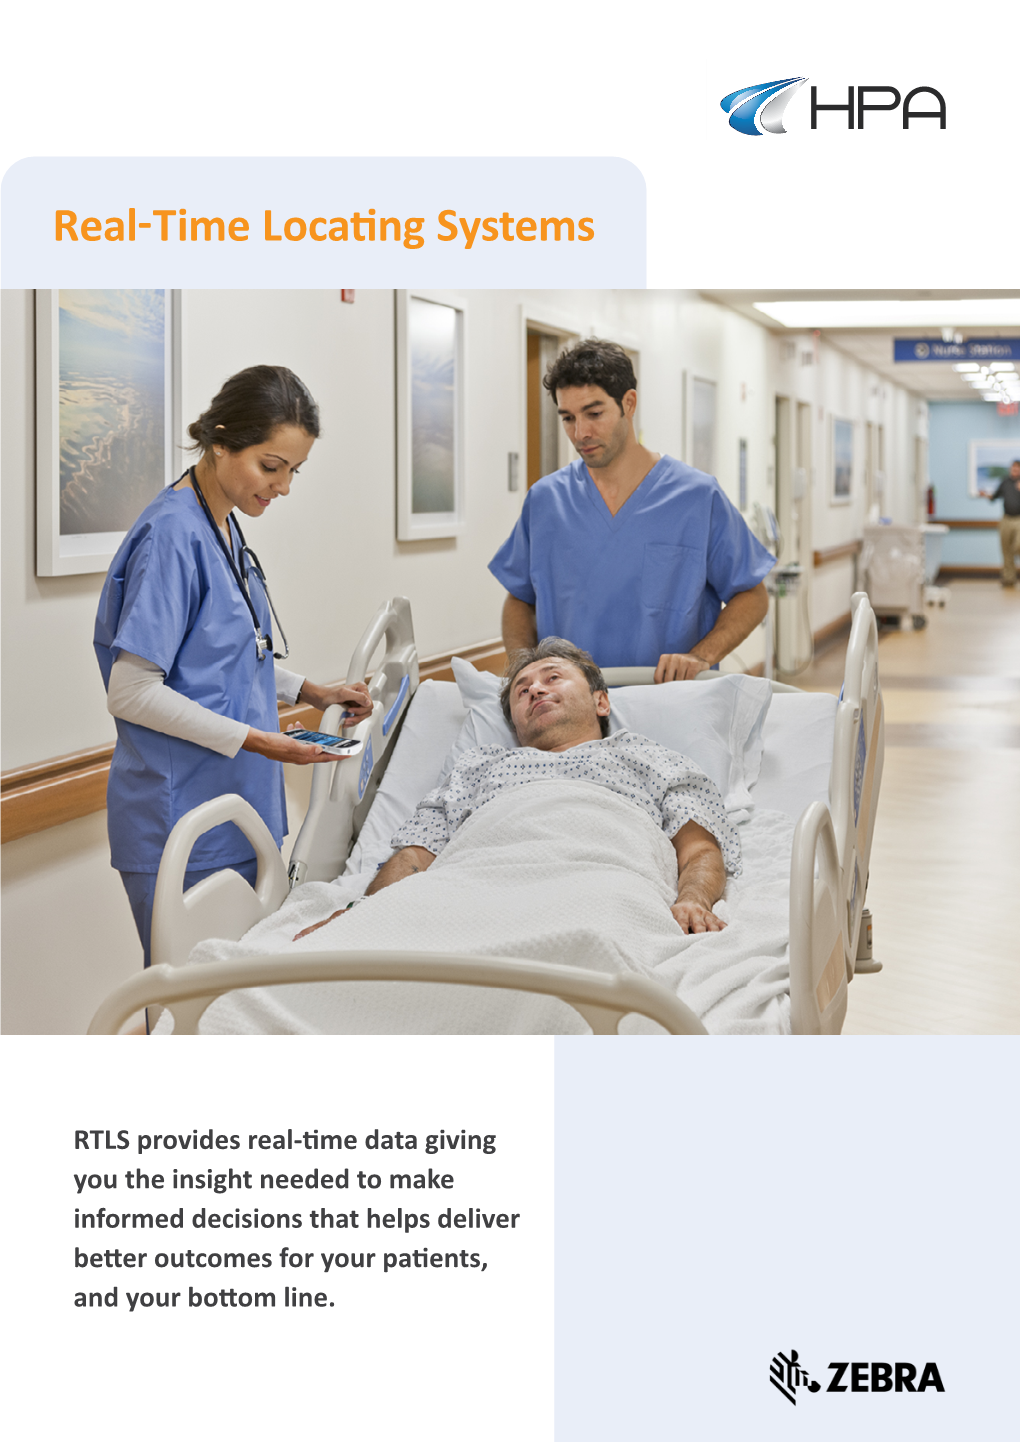 RTLS Provides Real-Time Data Giving You the Insight Needed to Make Informed Decisions That Helps Deliver Better Outcomes for Your Patients, and Your Bottom Line